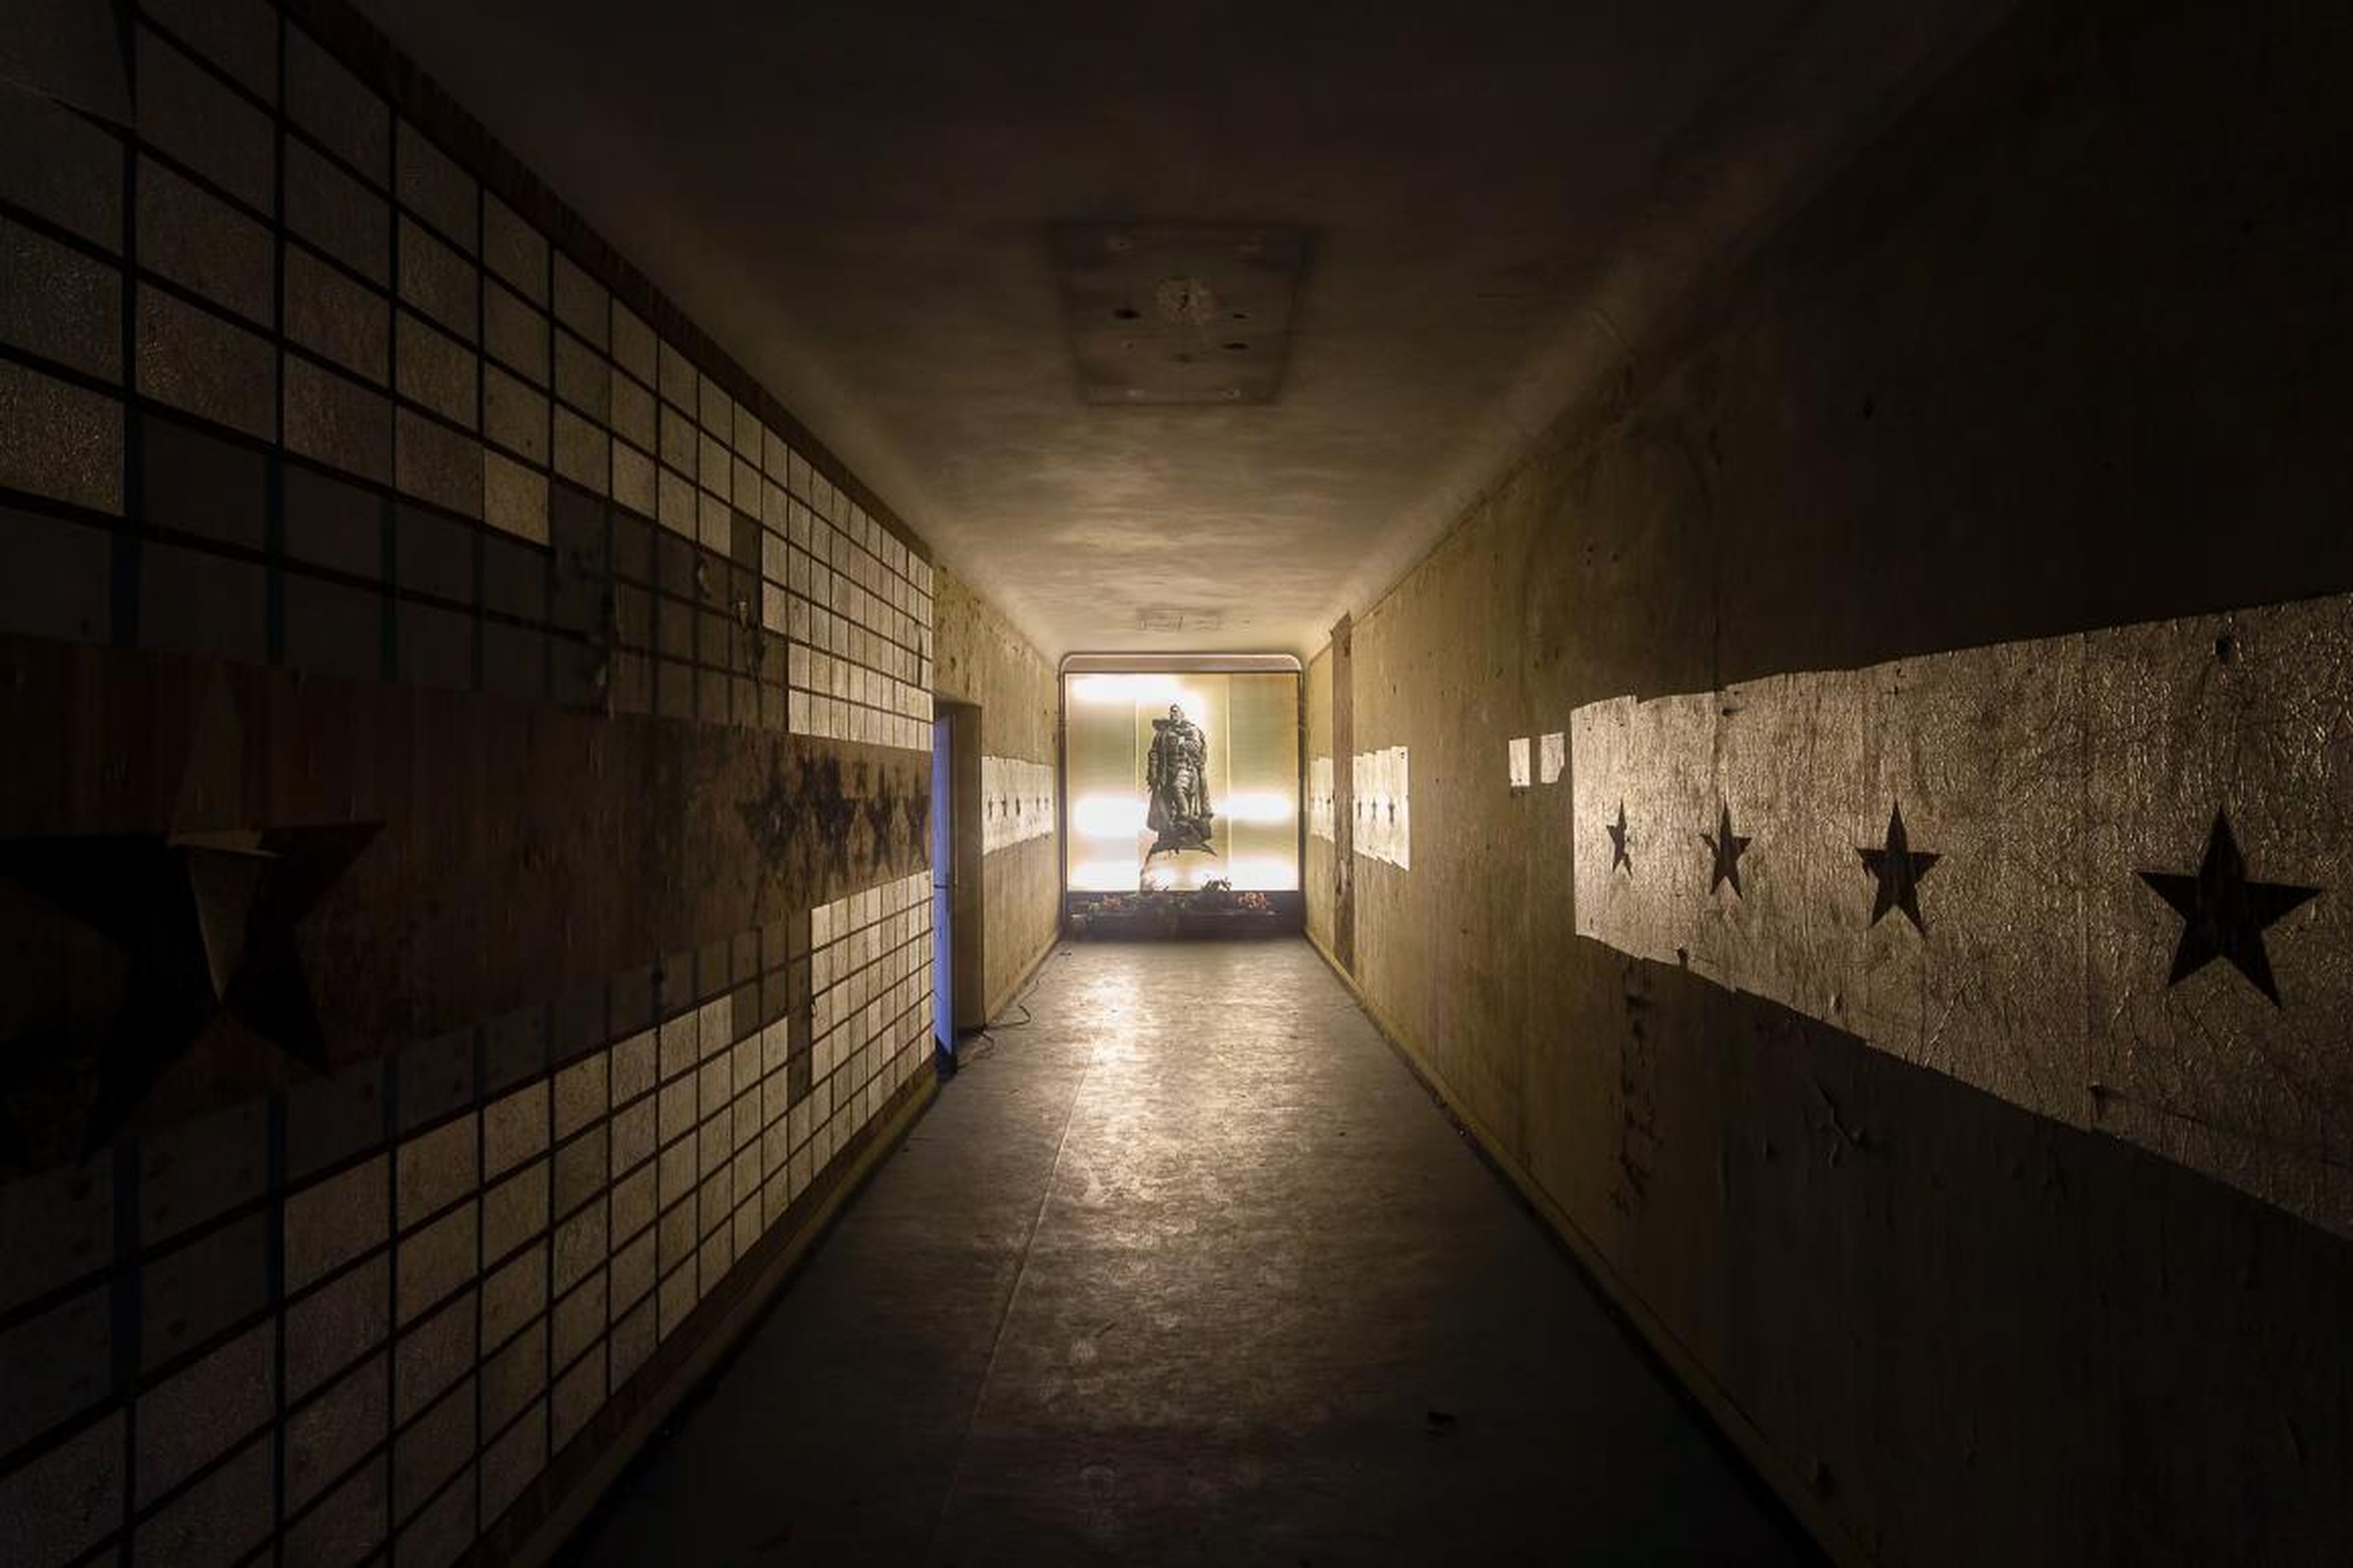 At the end of this dim hallway stands an illuminated image of Joseph Stalin carrying a child.